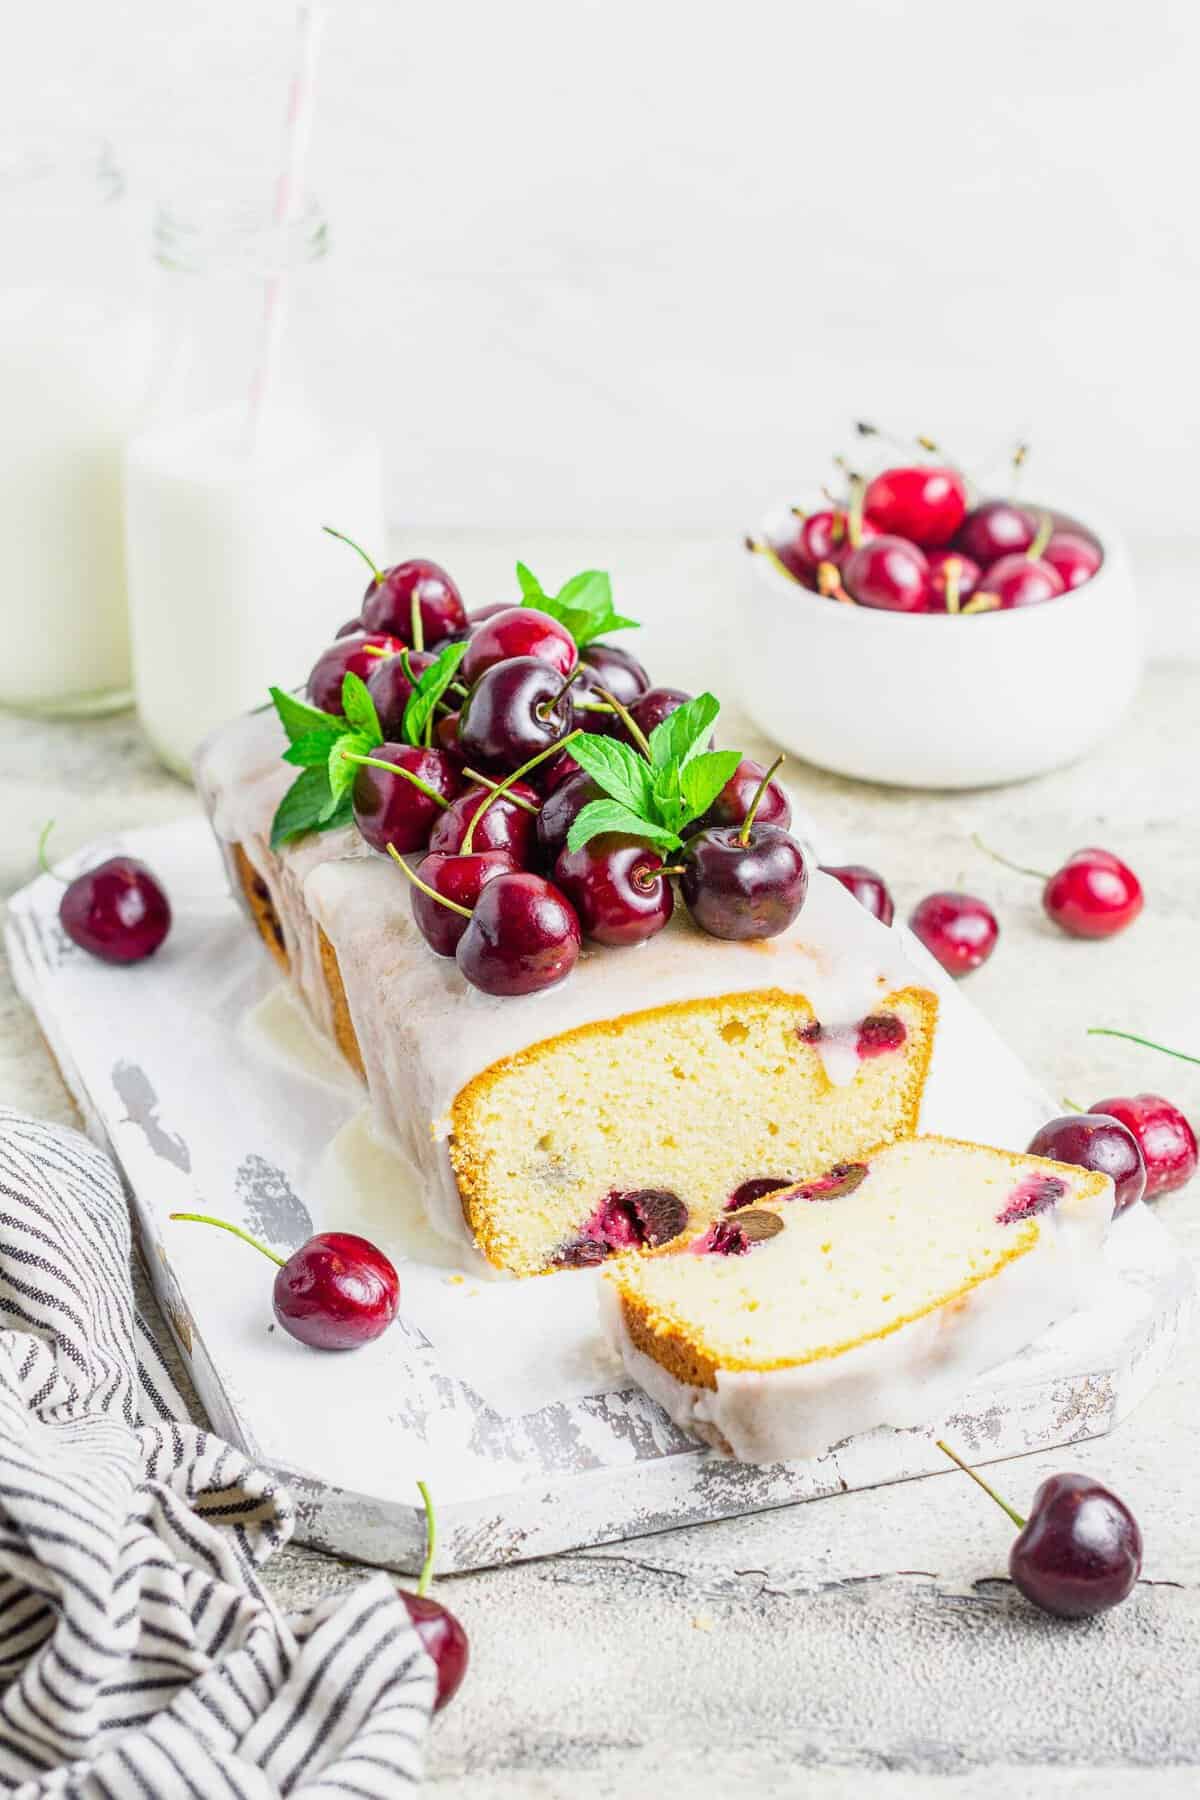 Cherry amaretto loaf cake on rustic board, topped with cherries and mint